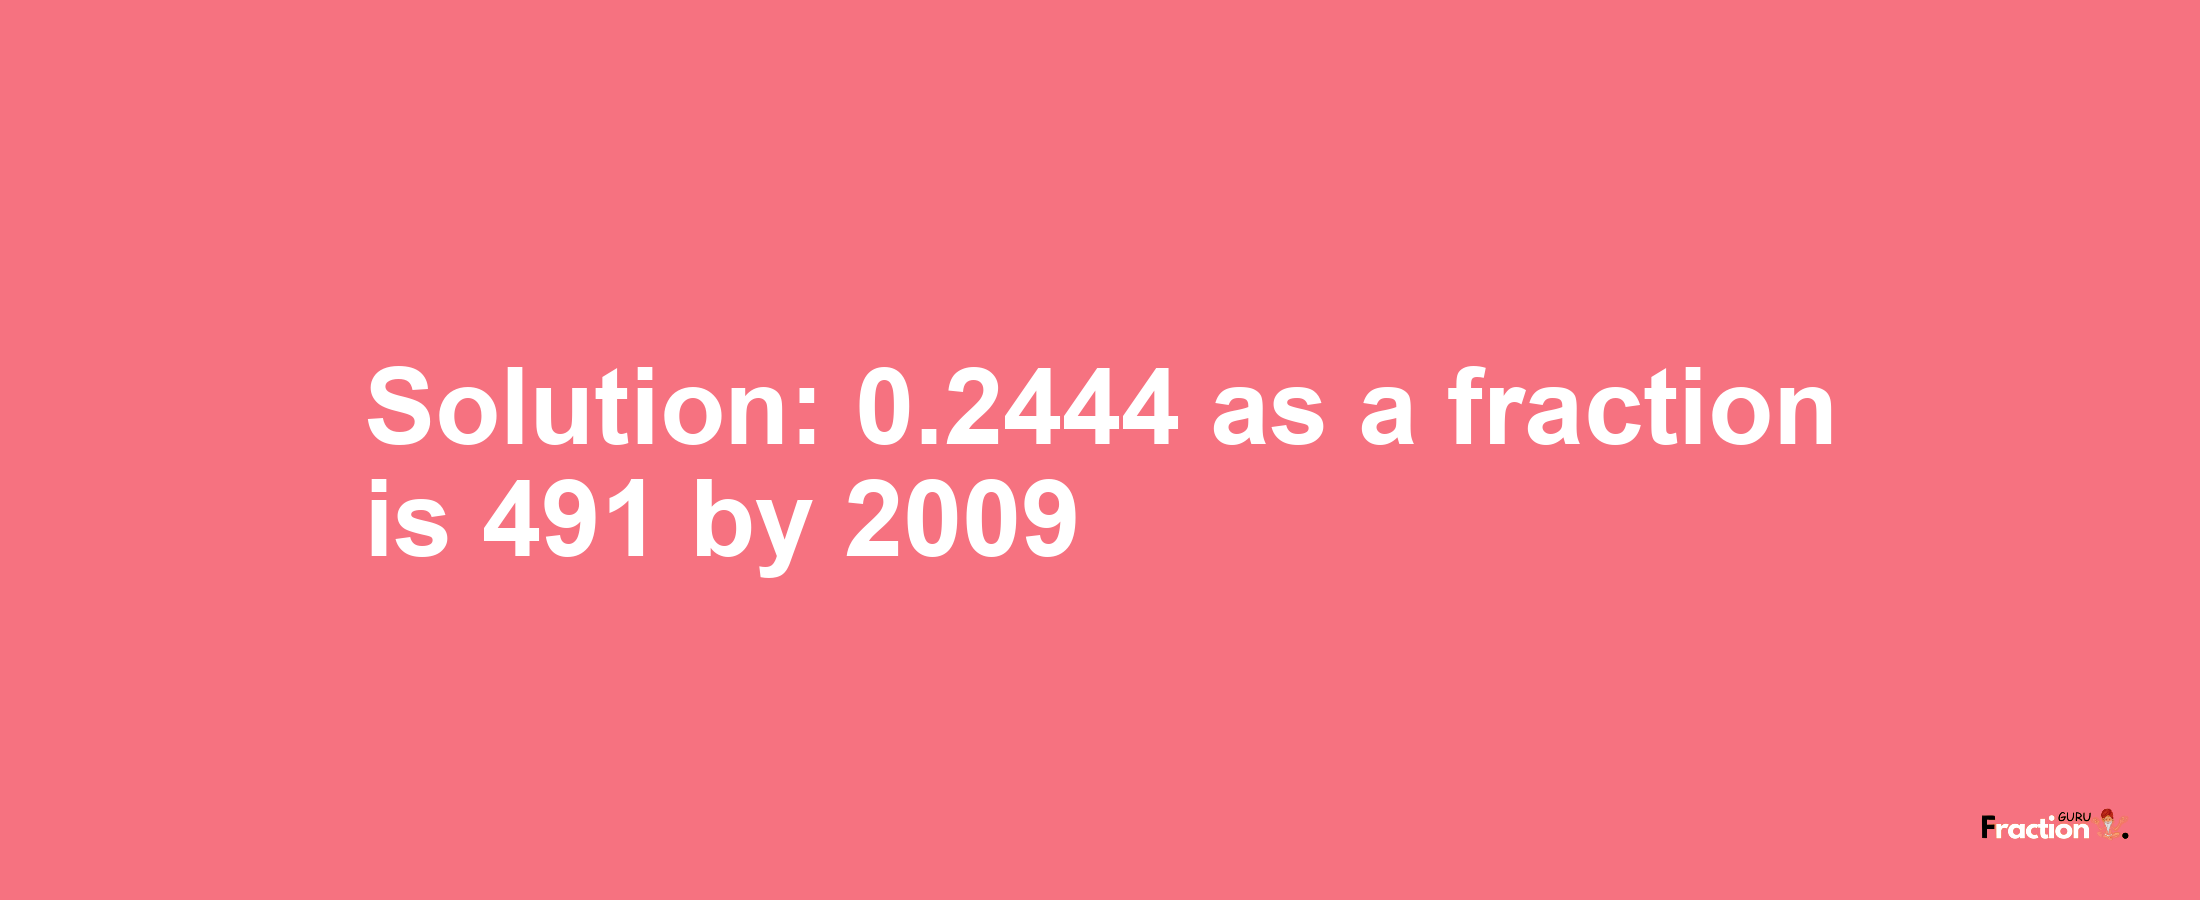 Solution:0.2444 as a fraction is 491/2009